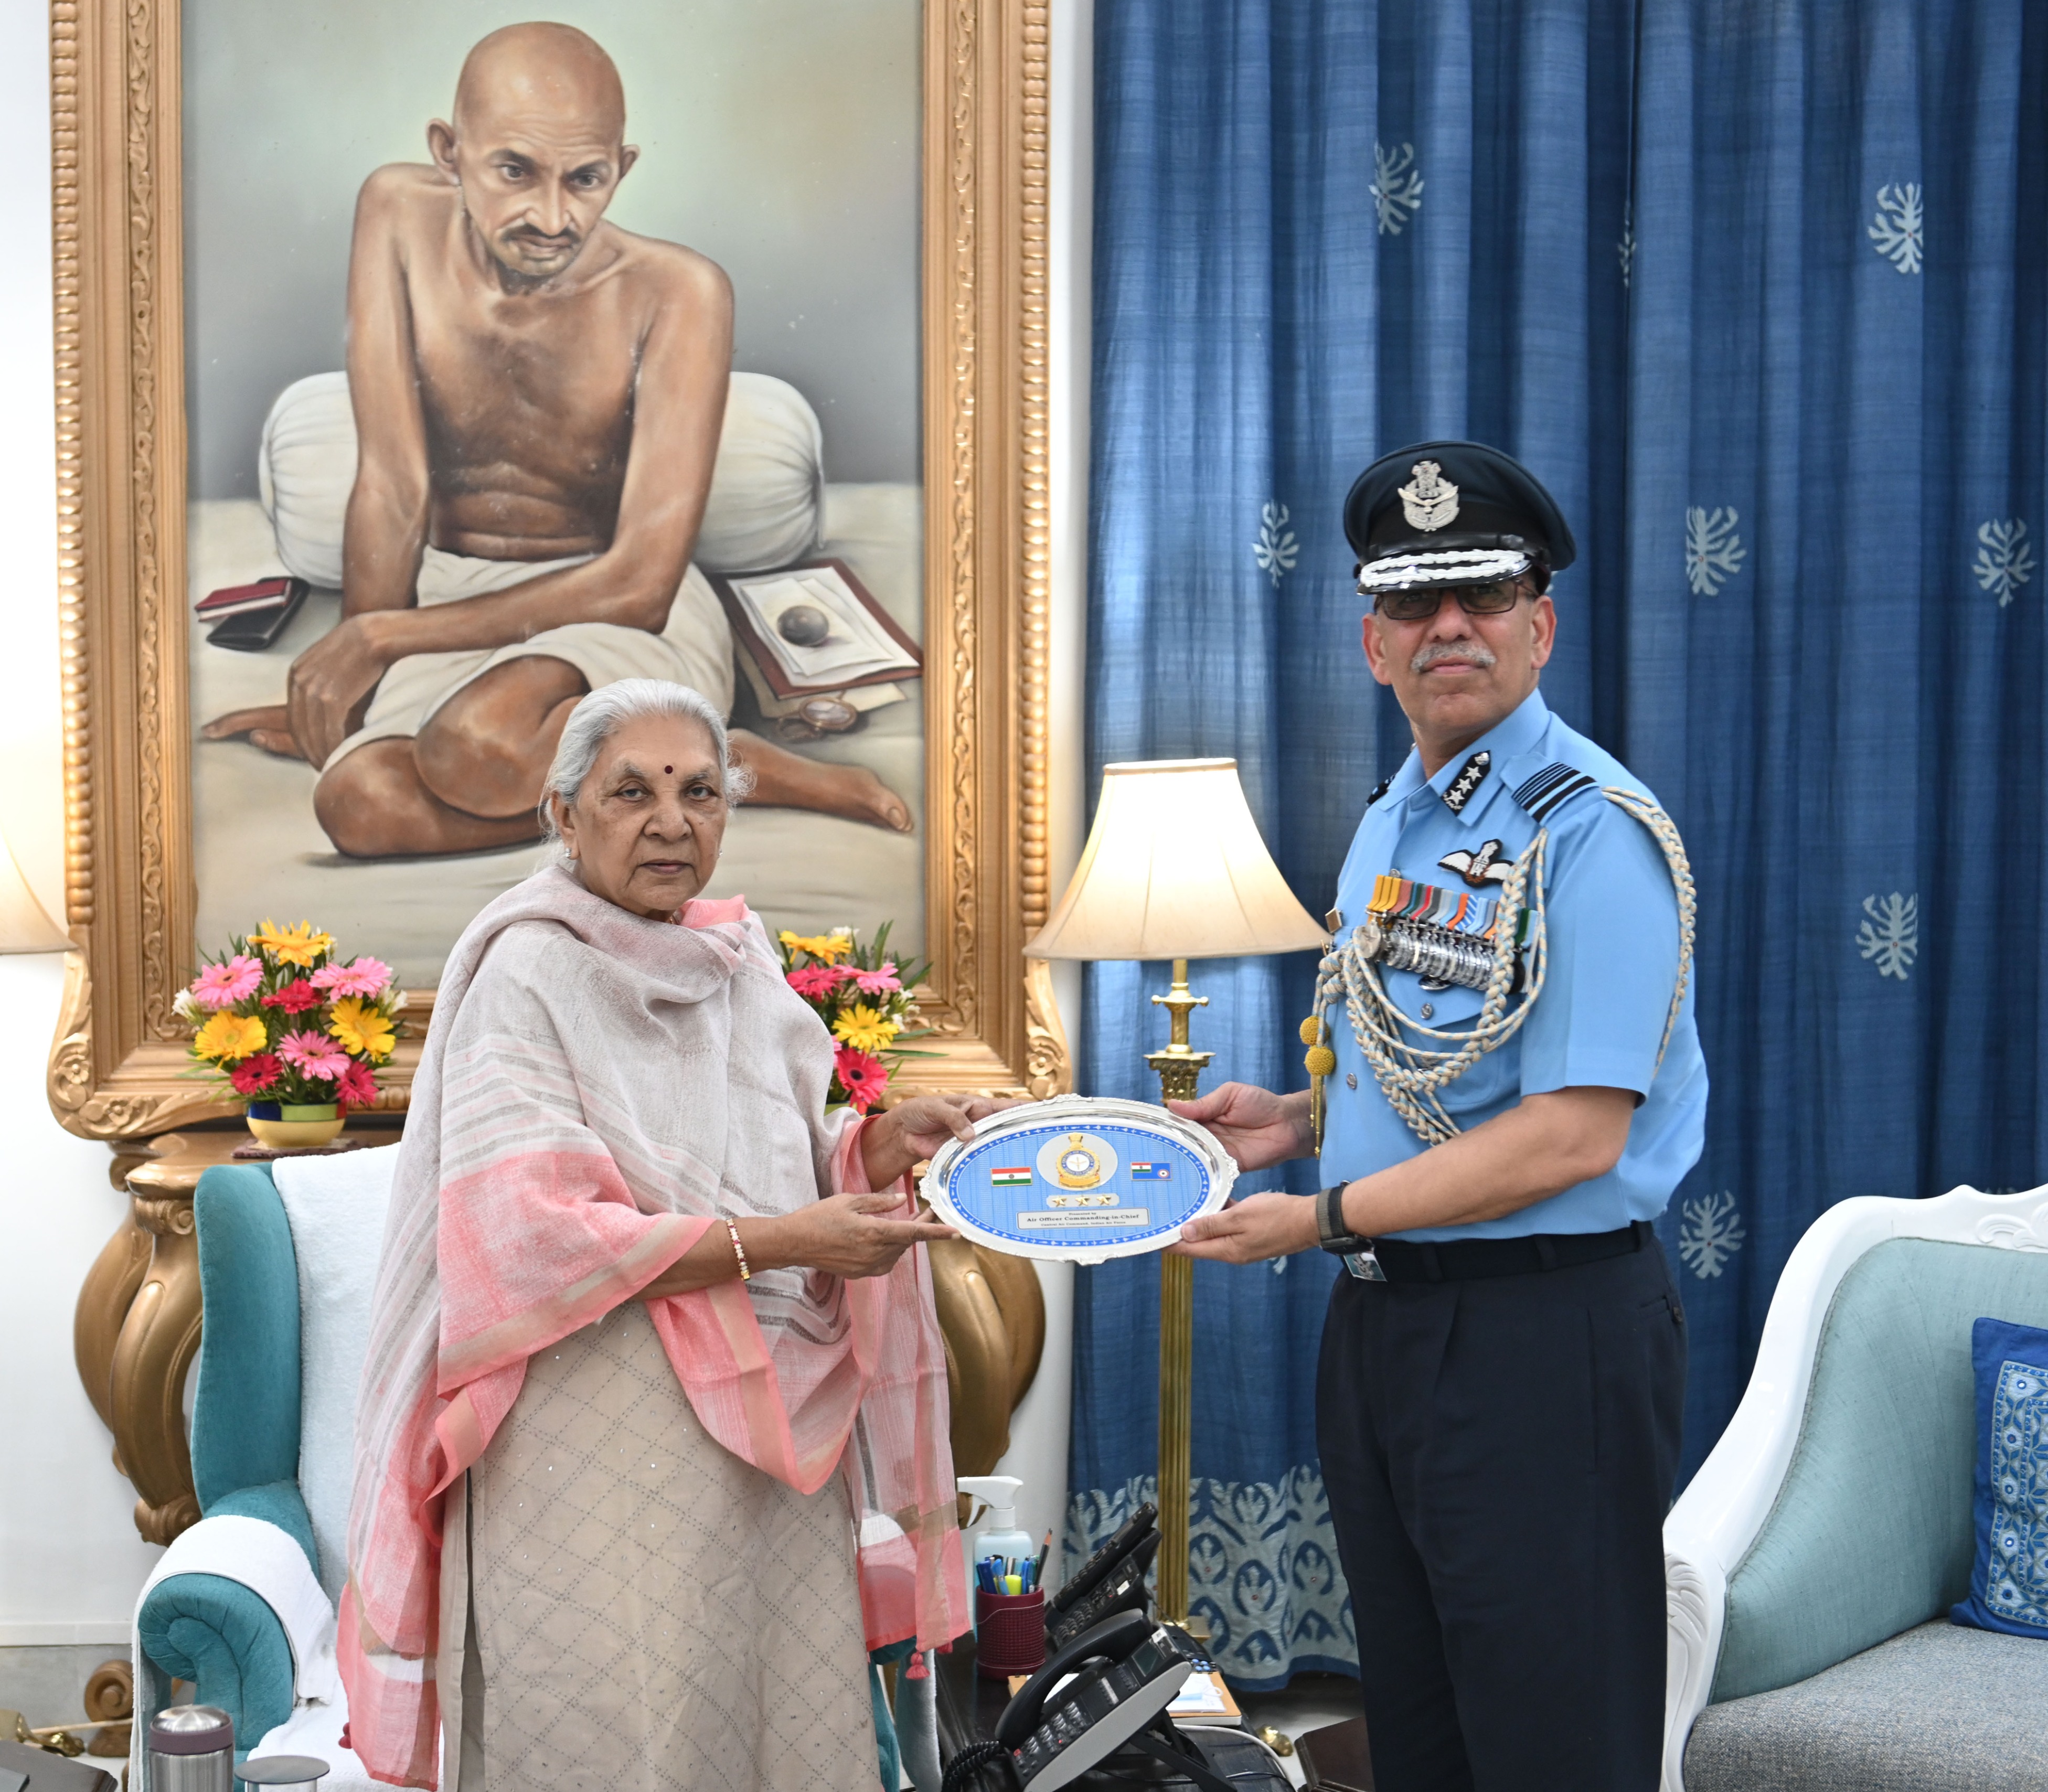 Air Marshal RGK Kapoor AVSM VM the newly appointed Air Officer Commanding in Chief Prayagraj paid a courtesy call on the Governor